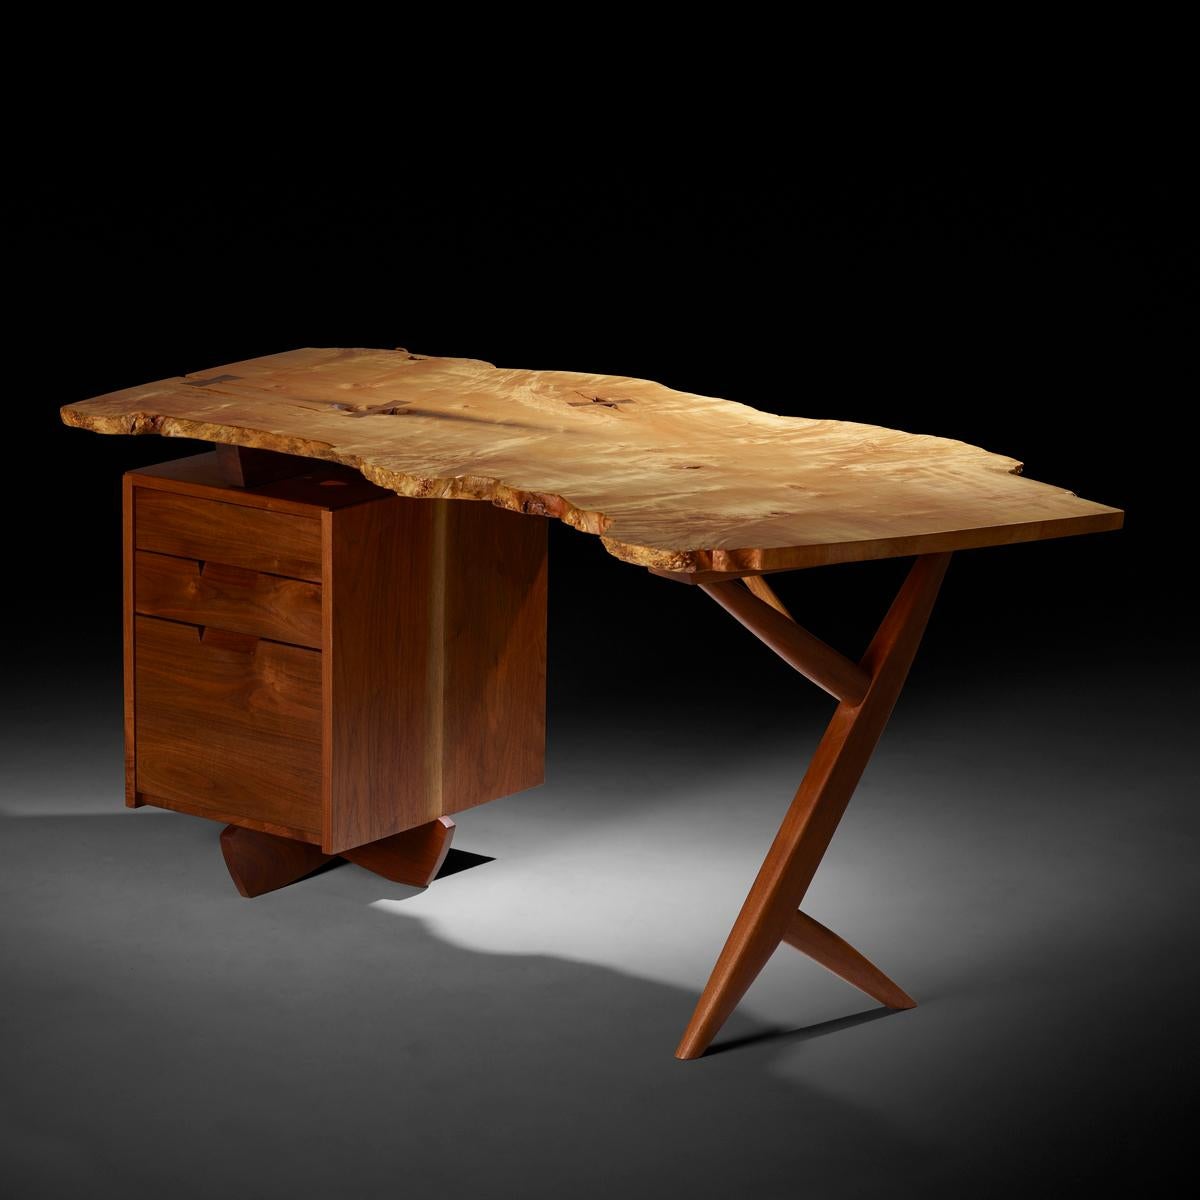 The desk features a dramatic figured burl top with three rosewood butterflies, knots and natural fissures. There are three drawers, one containing file storage. Signed, dated and inscribed to underside 